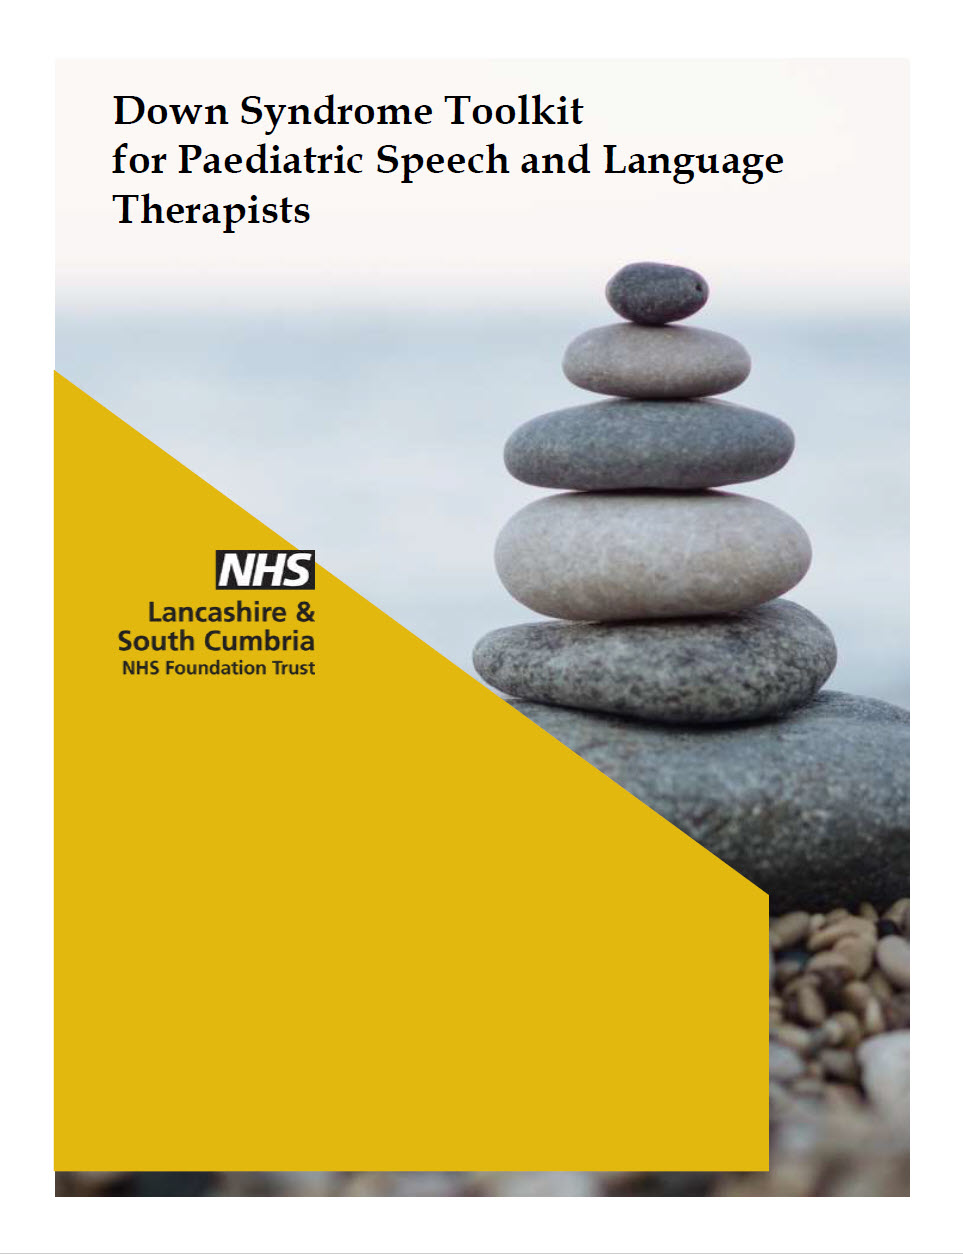 The cover of the Down Syndrome Toolkit for Paediatric Speech and Language Therapists